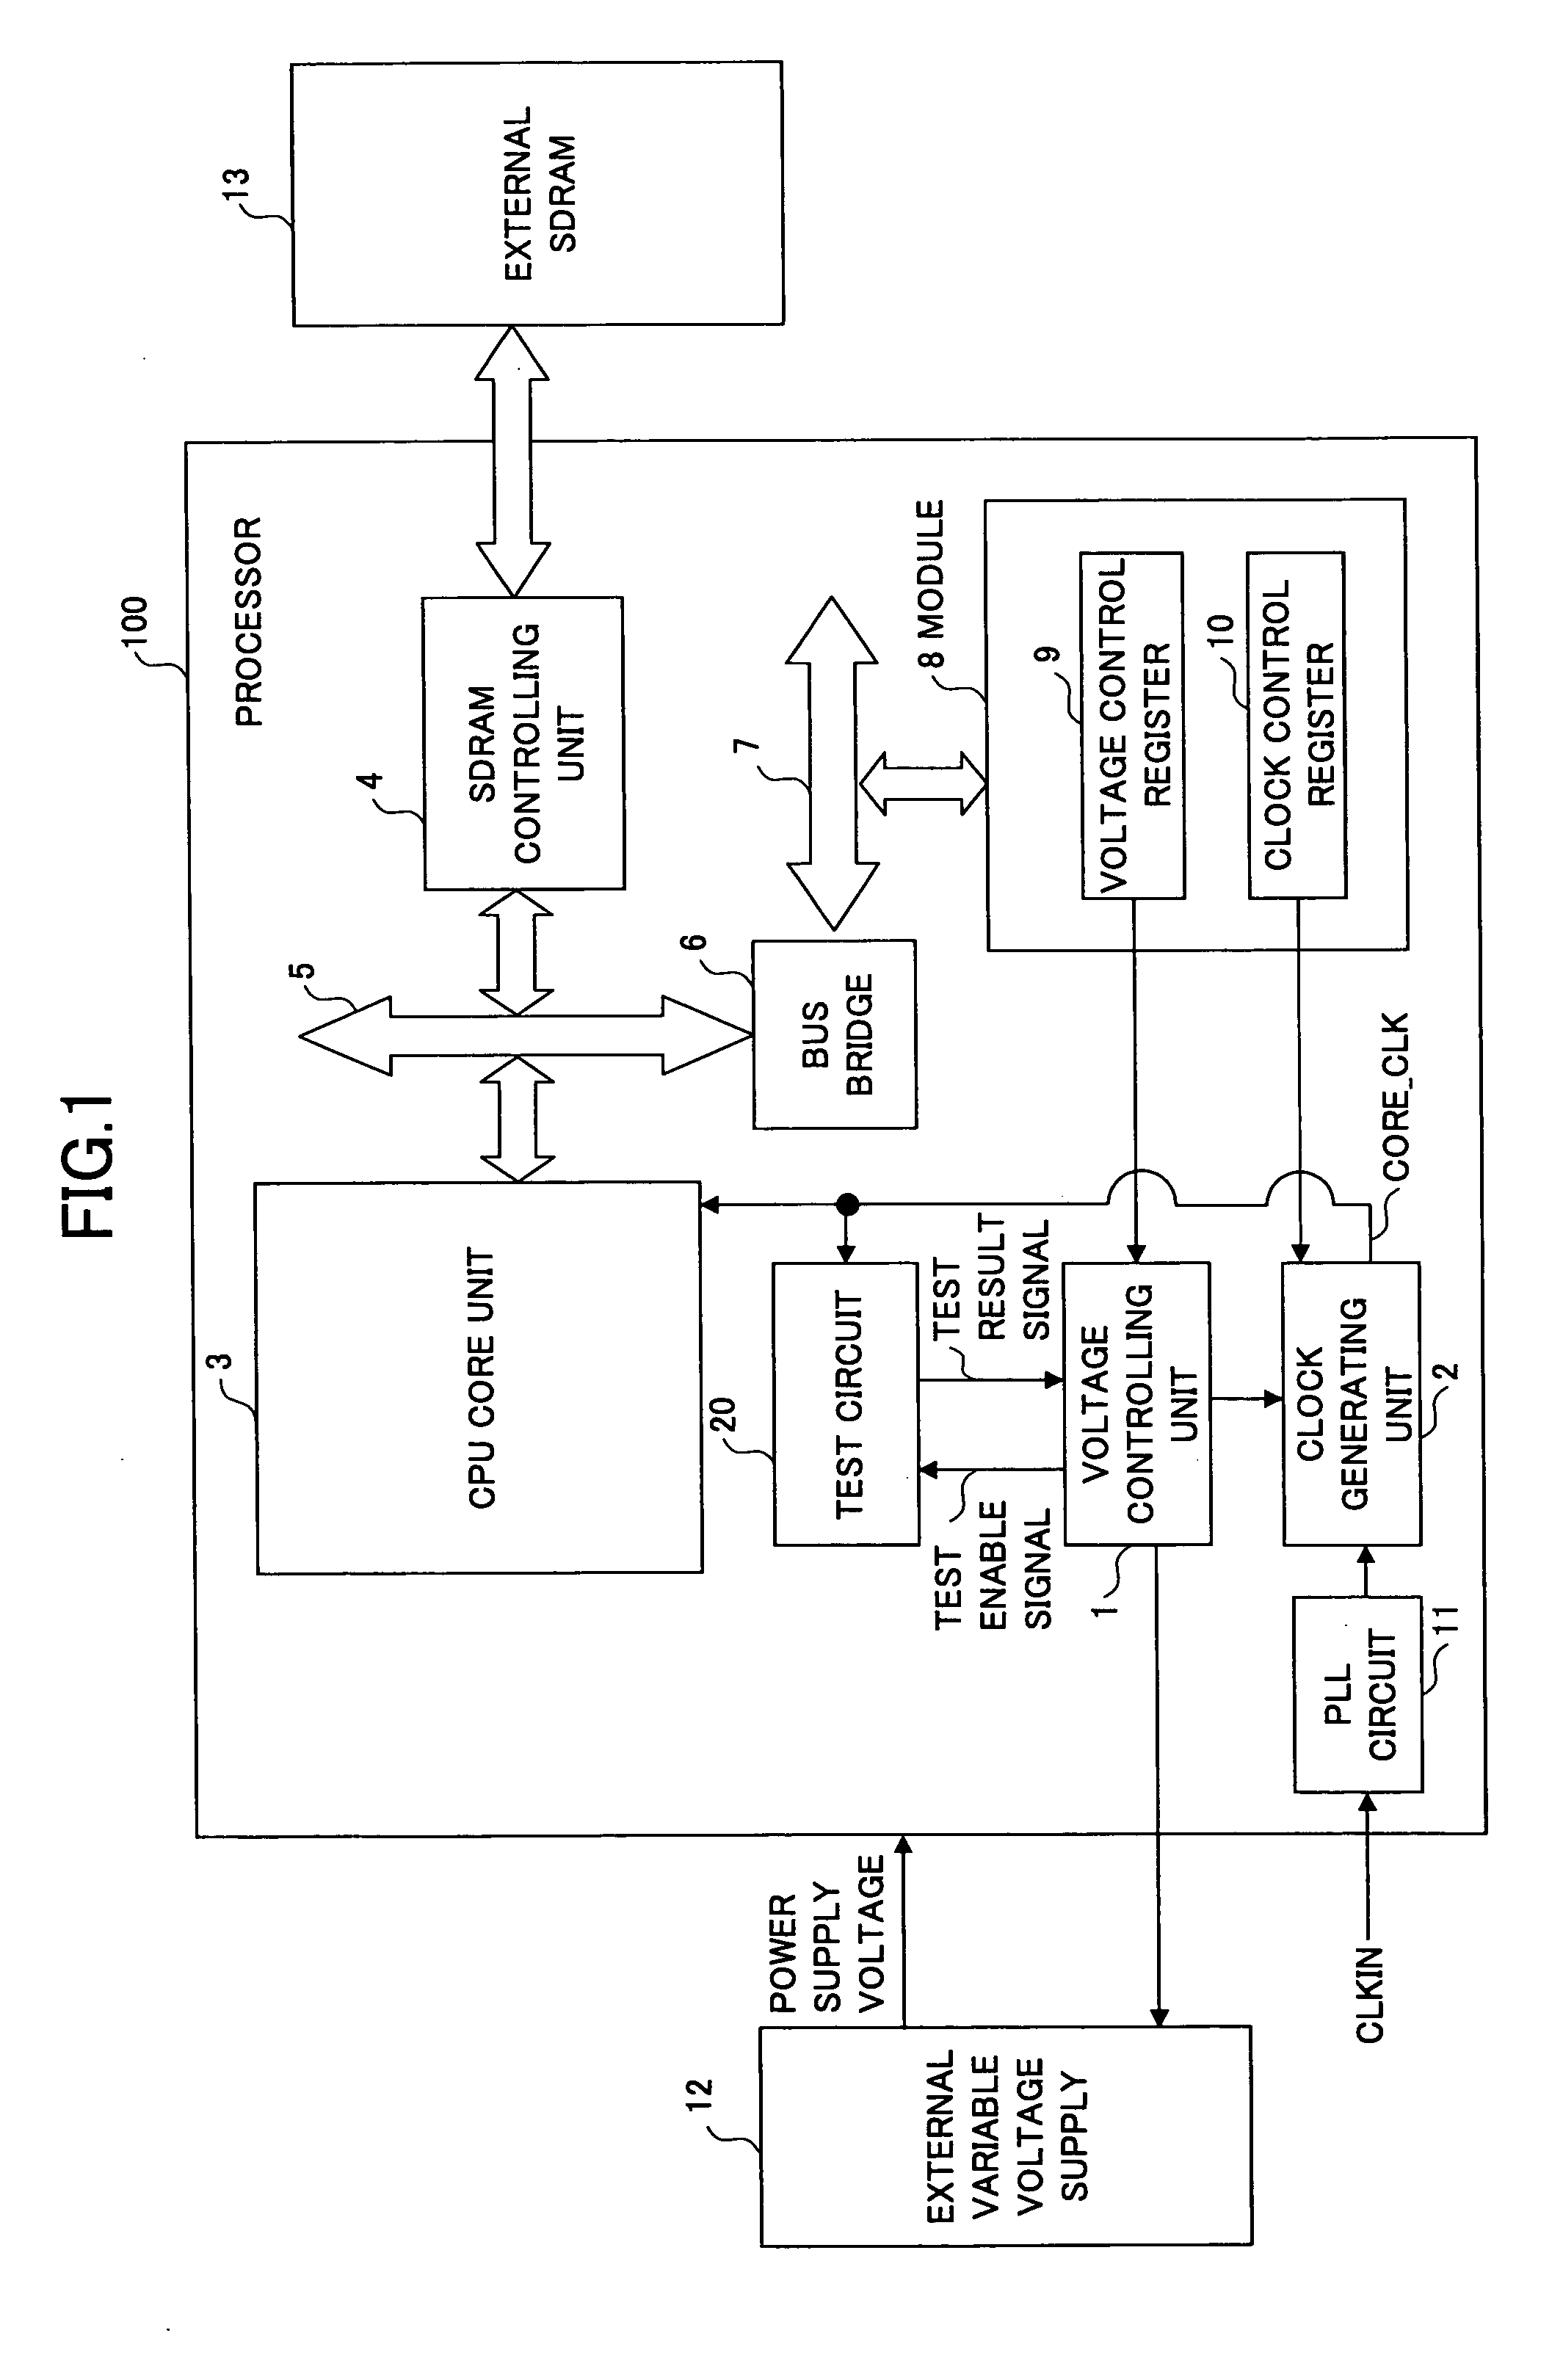 Changing of operating voltage in semiconductor integrated circuit